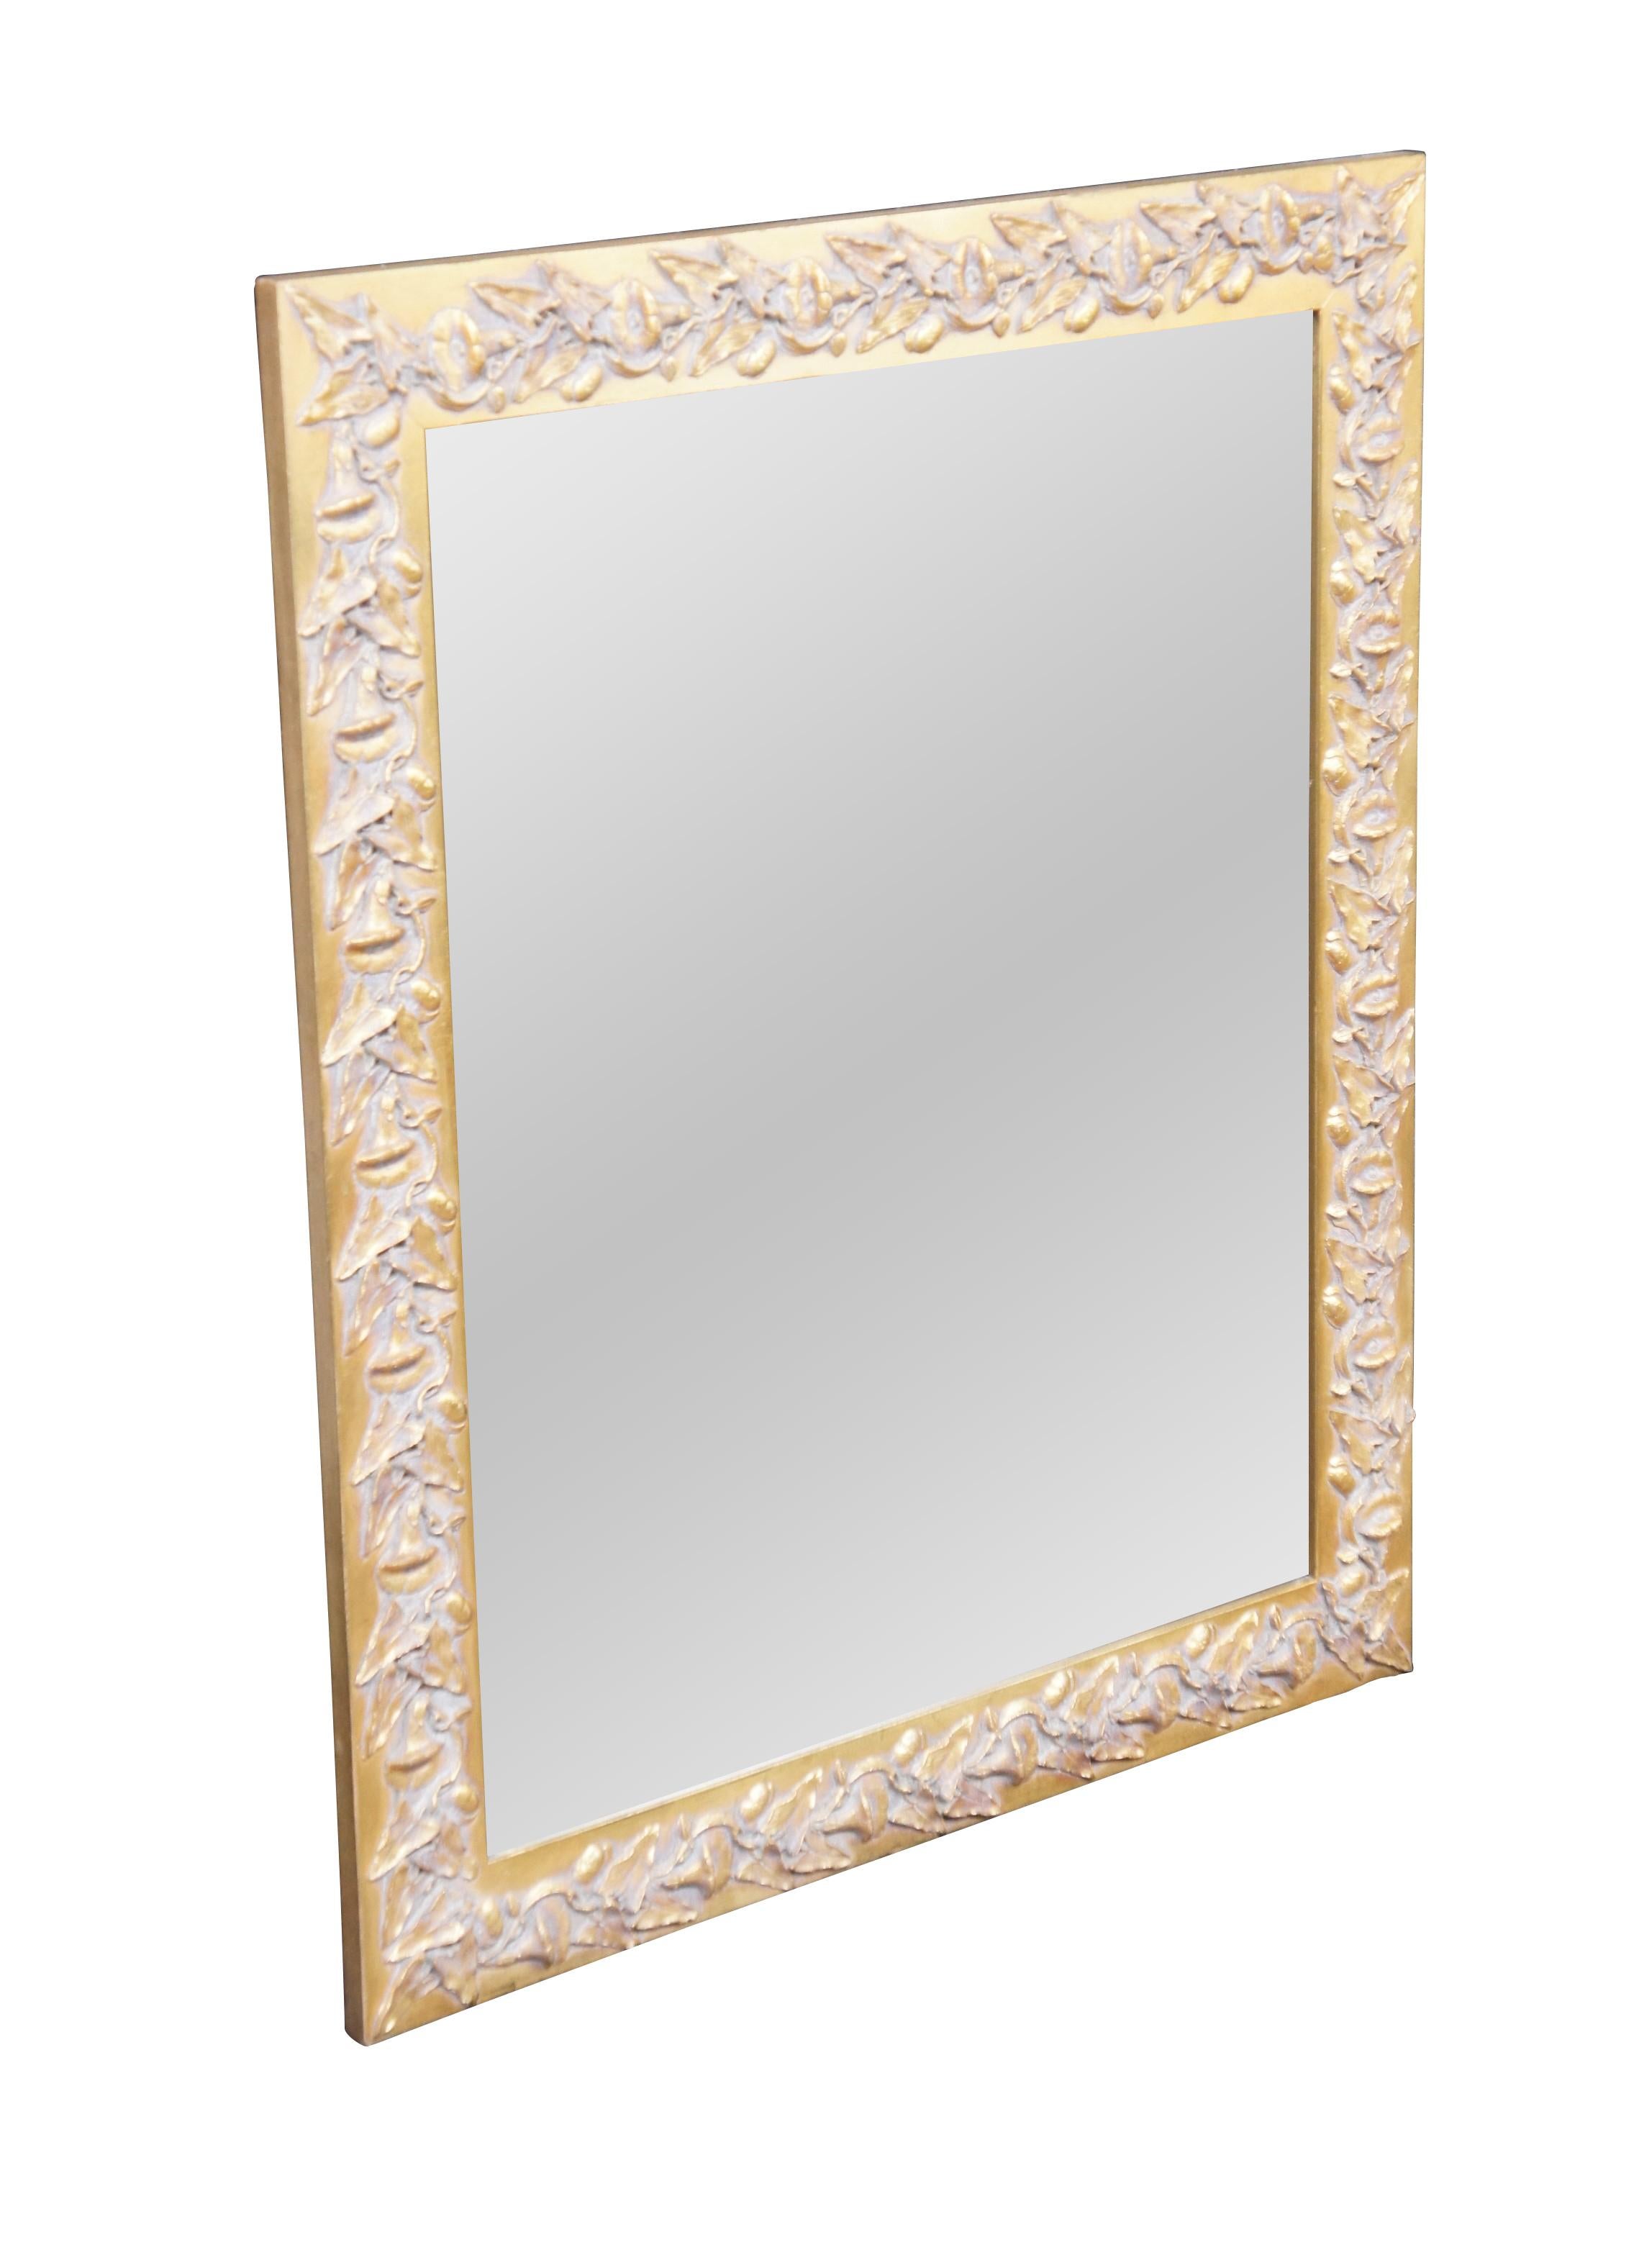 An ornate Neoclassical style mirror from the last half of the 20th century.  Features a low relief raised frame with foliate and vine motif.  The mirror can be used horizontal or vertical.  Great for use in along any wall, in a bathroom or as an